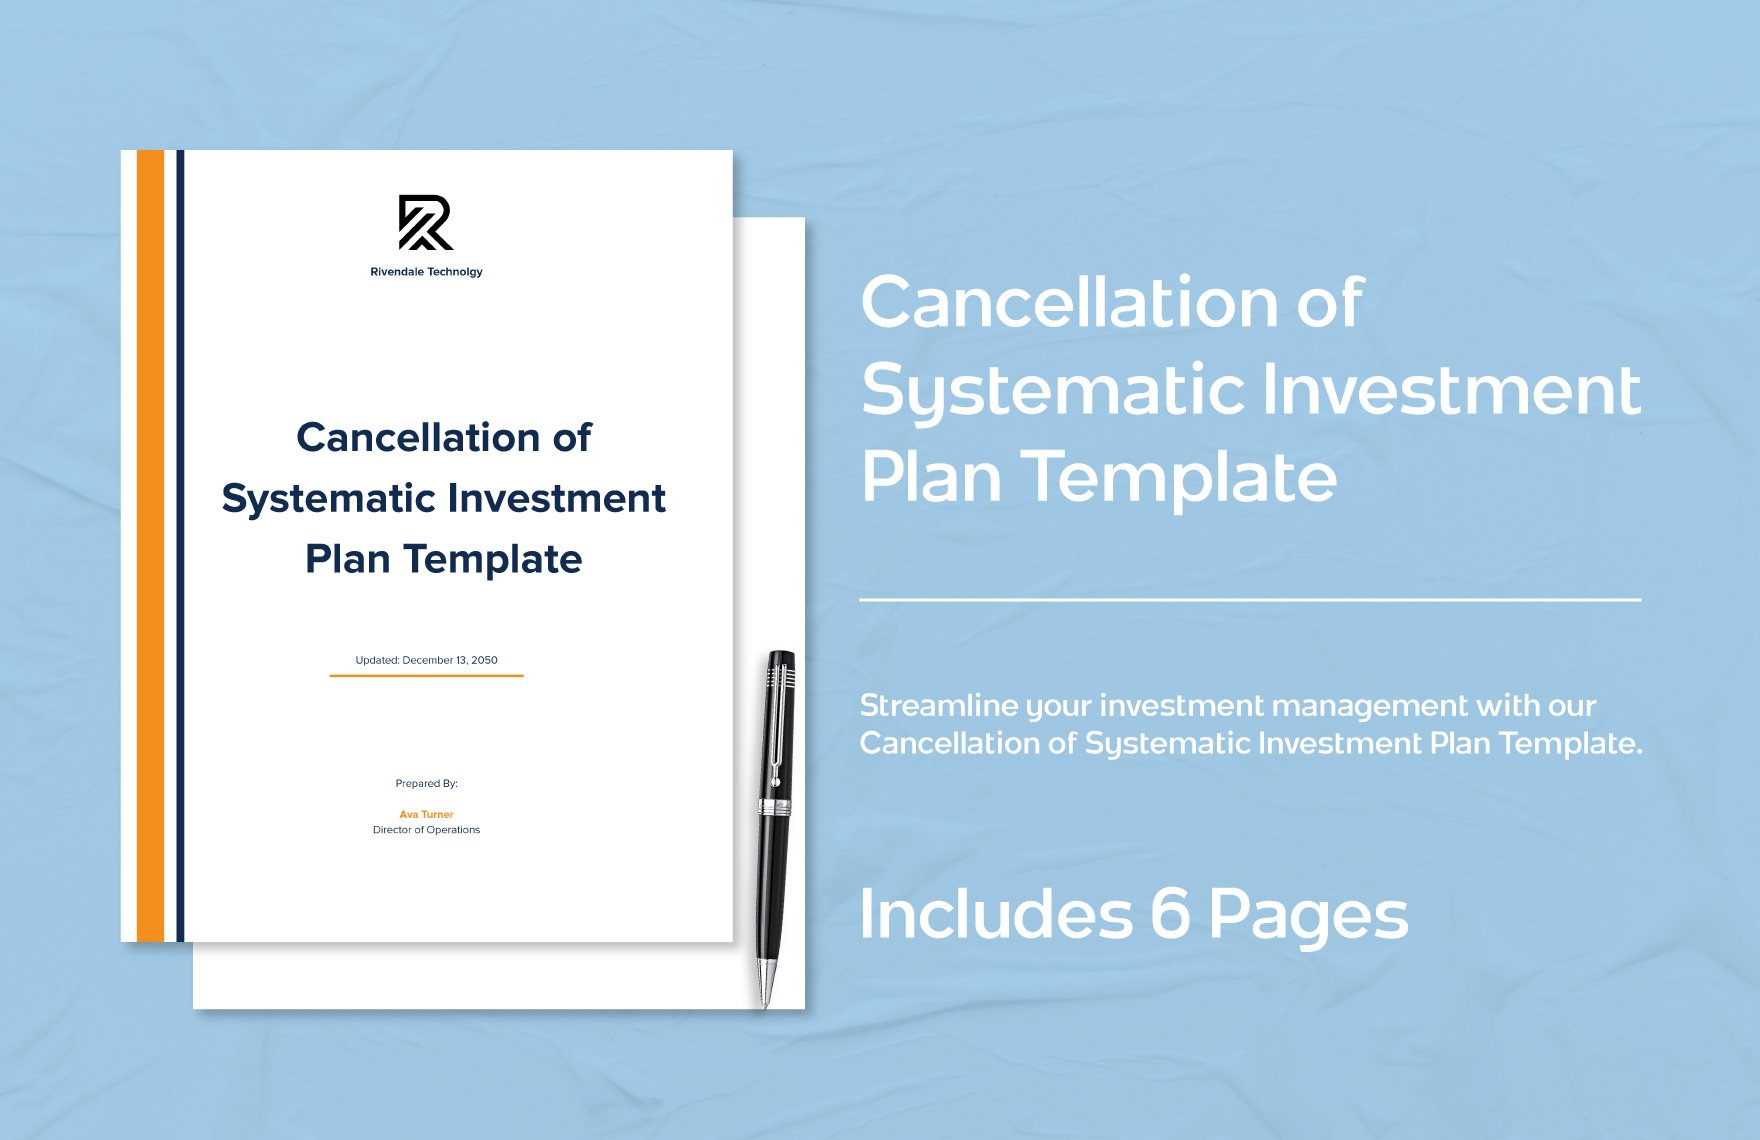 Cancellation of Systematic Investment Plan Template